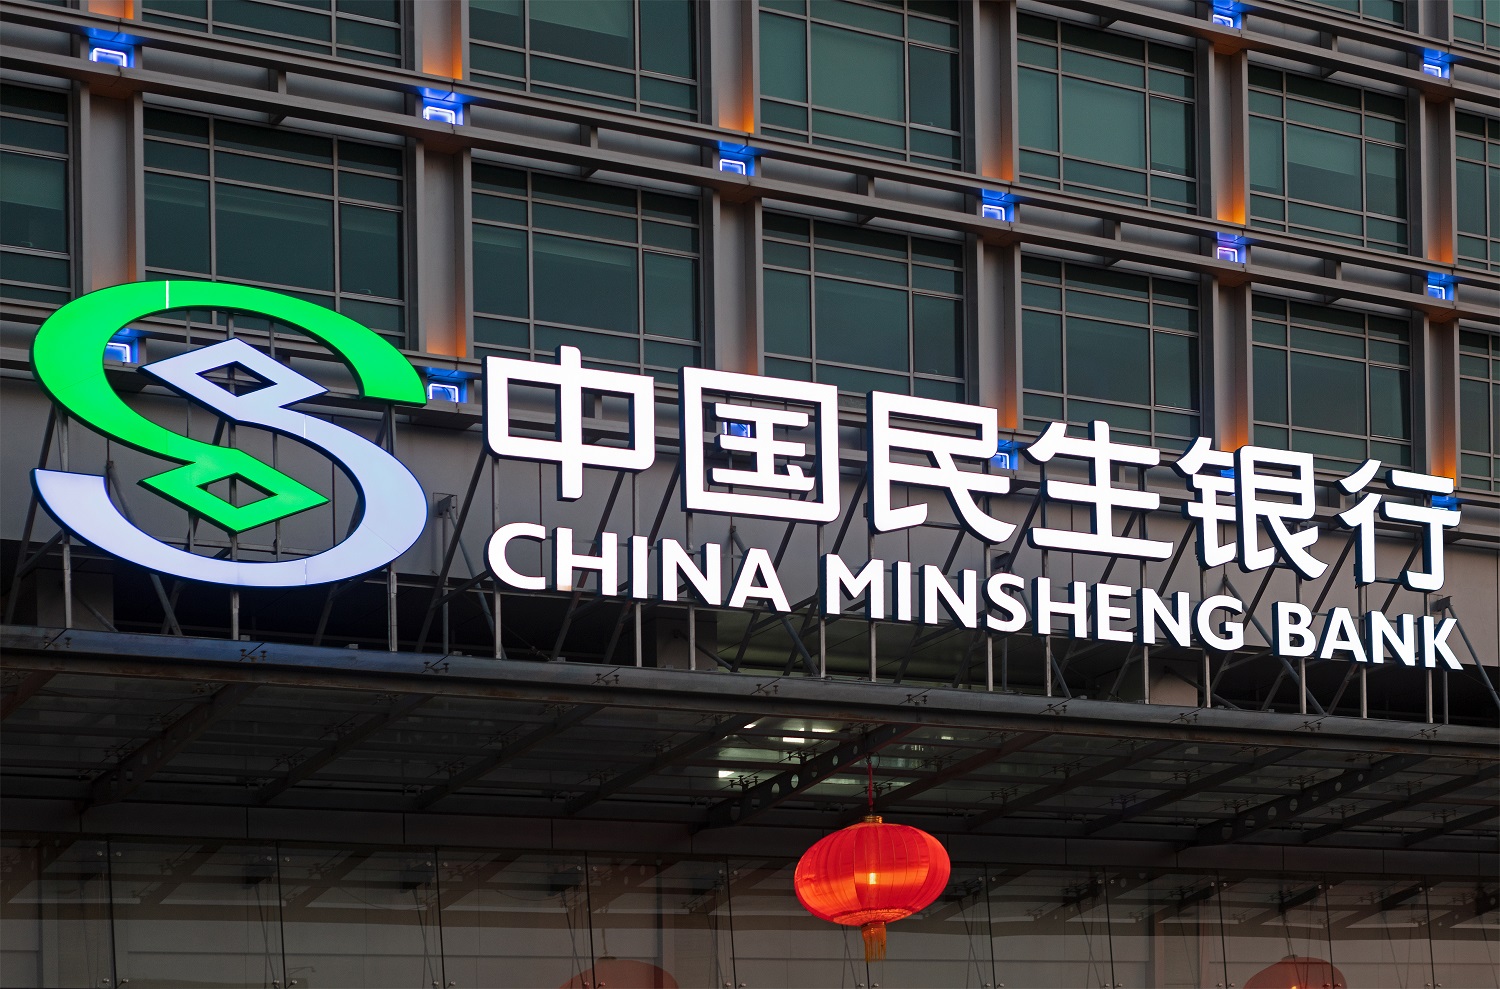 A sign that reads 'China Minsheng Bank' on the side of a building in Beijing, the capital of China.